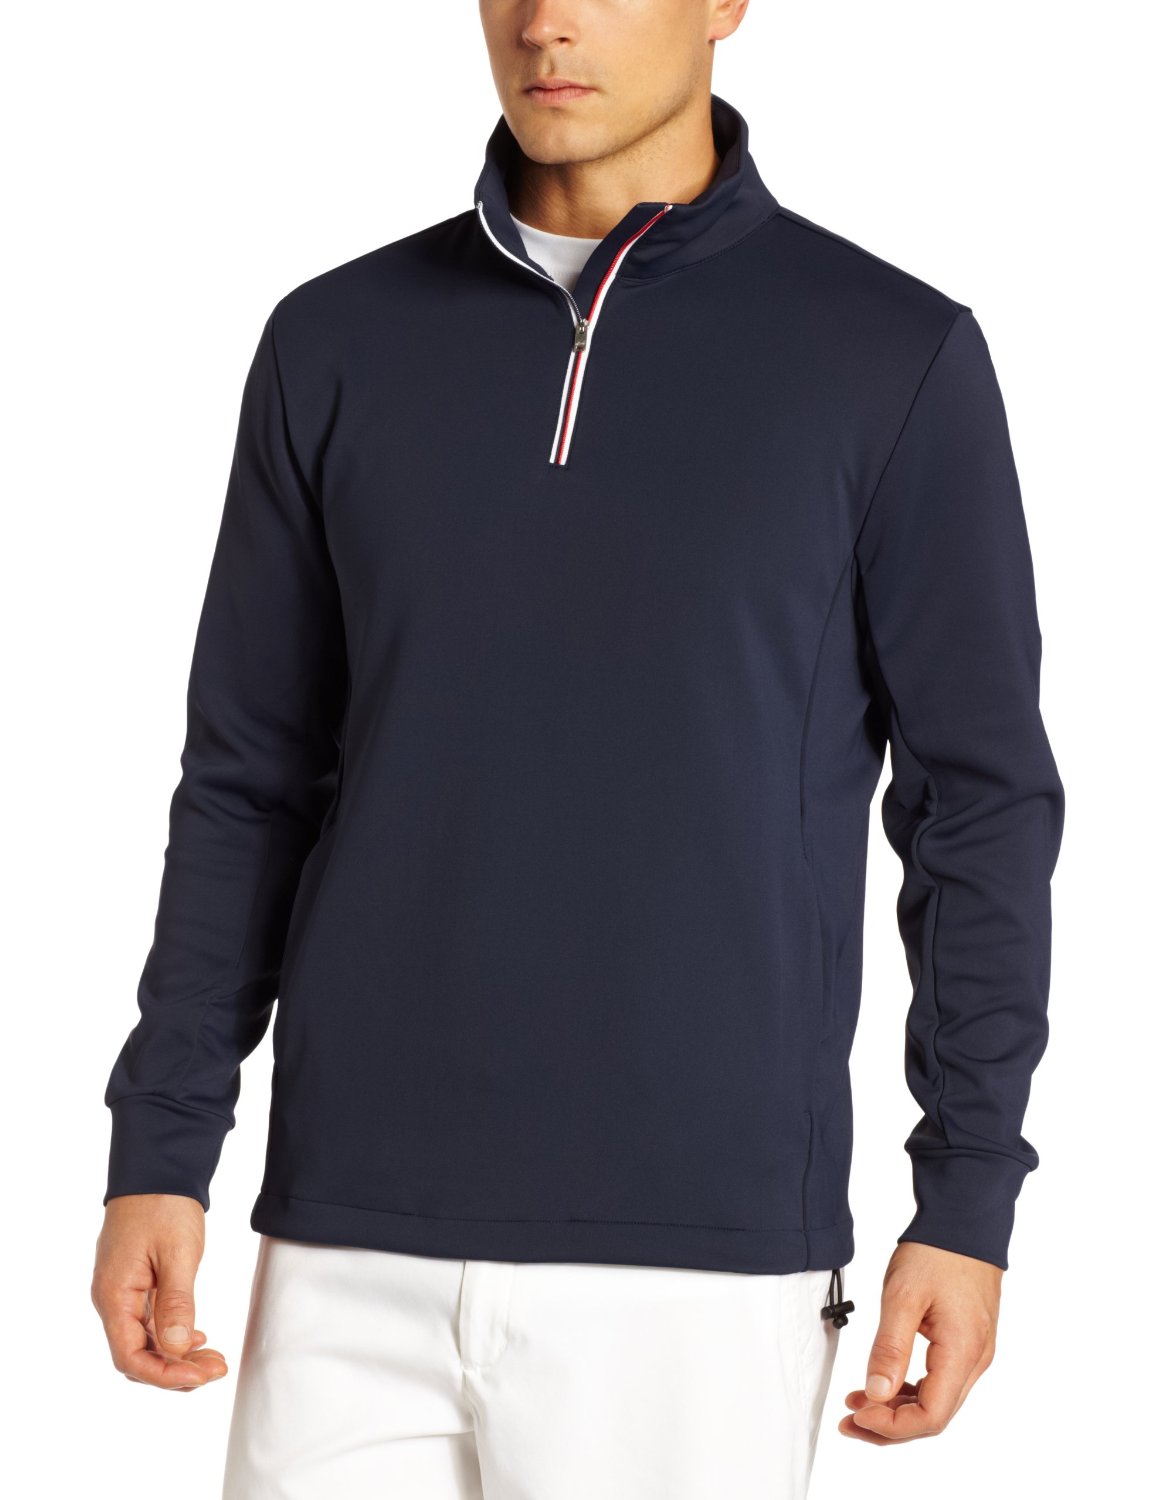 Mens Greg Norman Collection Fashion Golf Pullovers